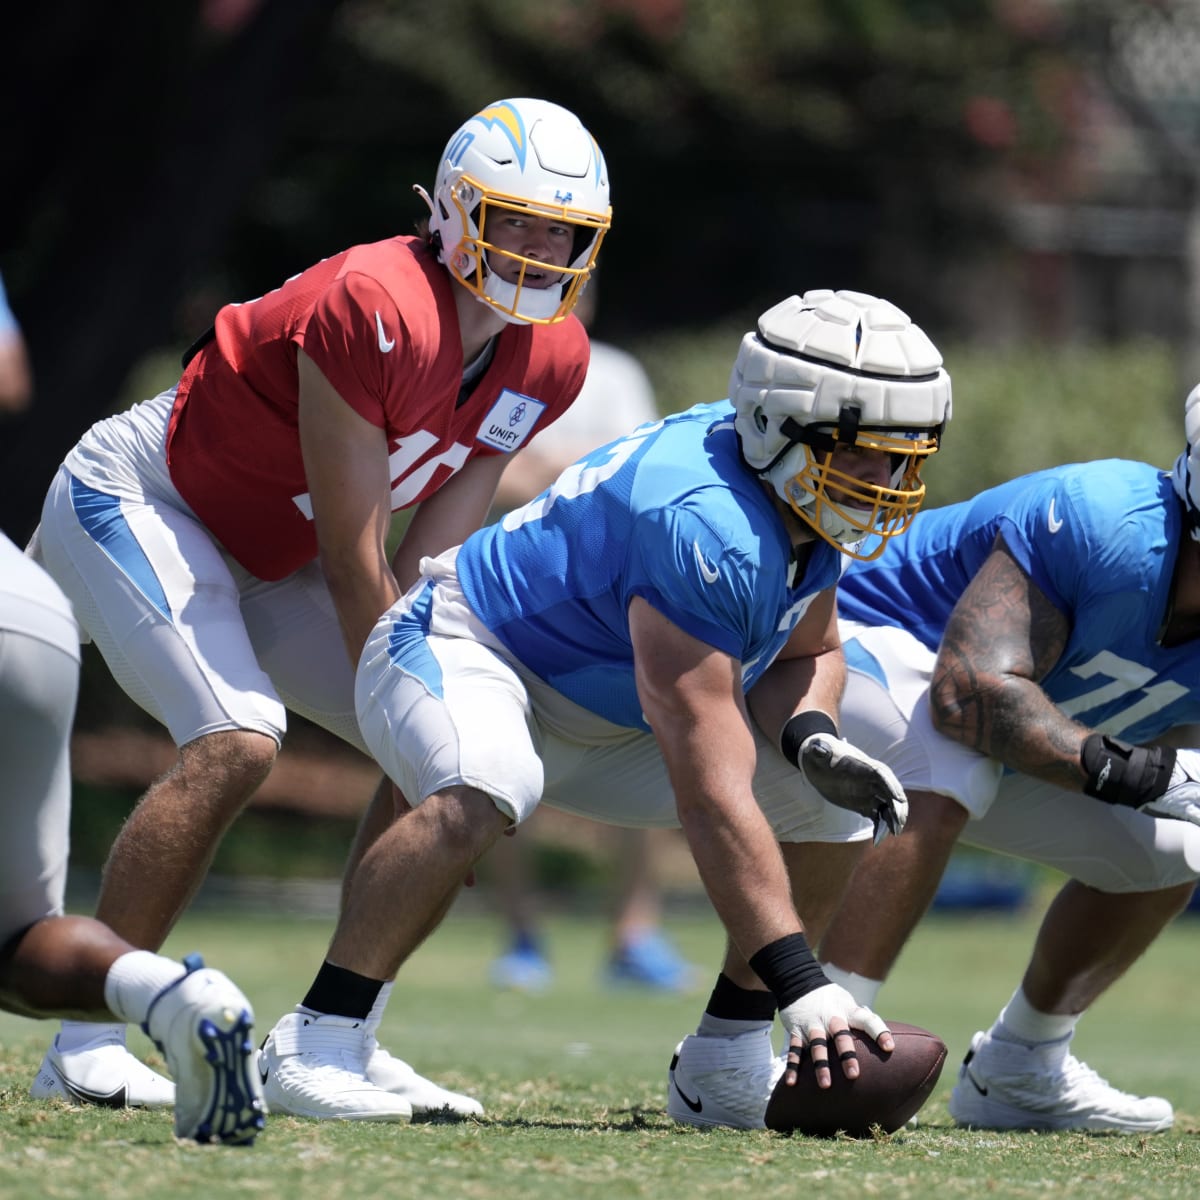 Familiarity important for Herbert as Chargers OTAs begin